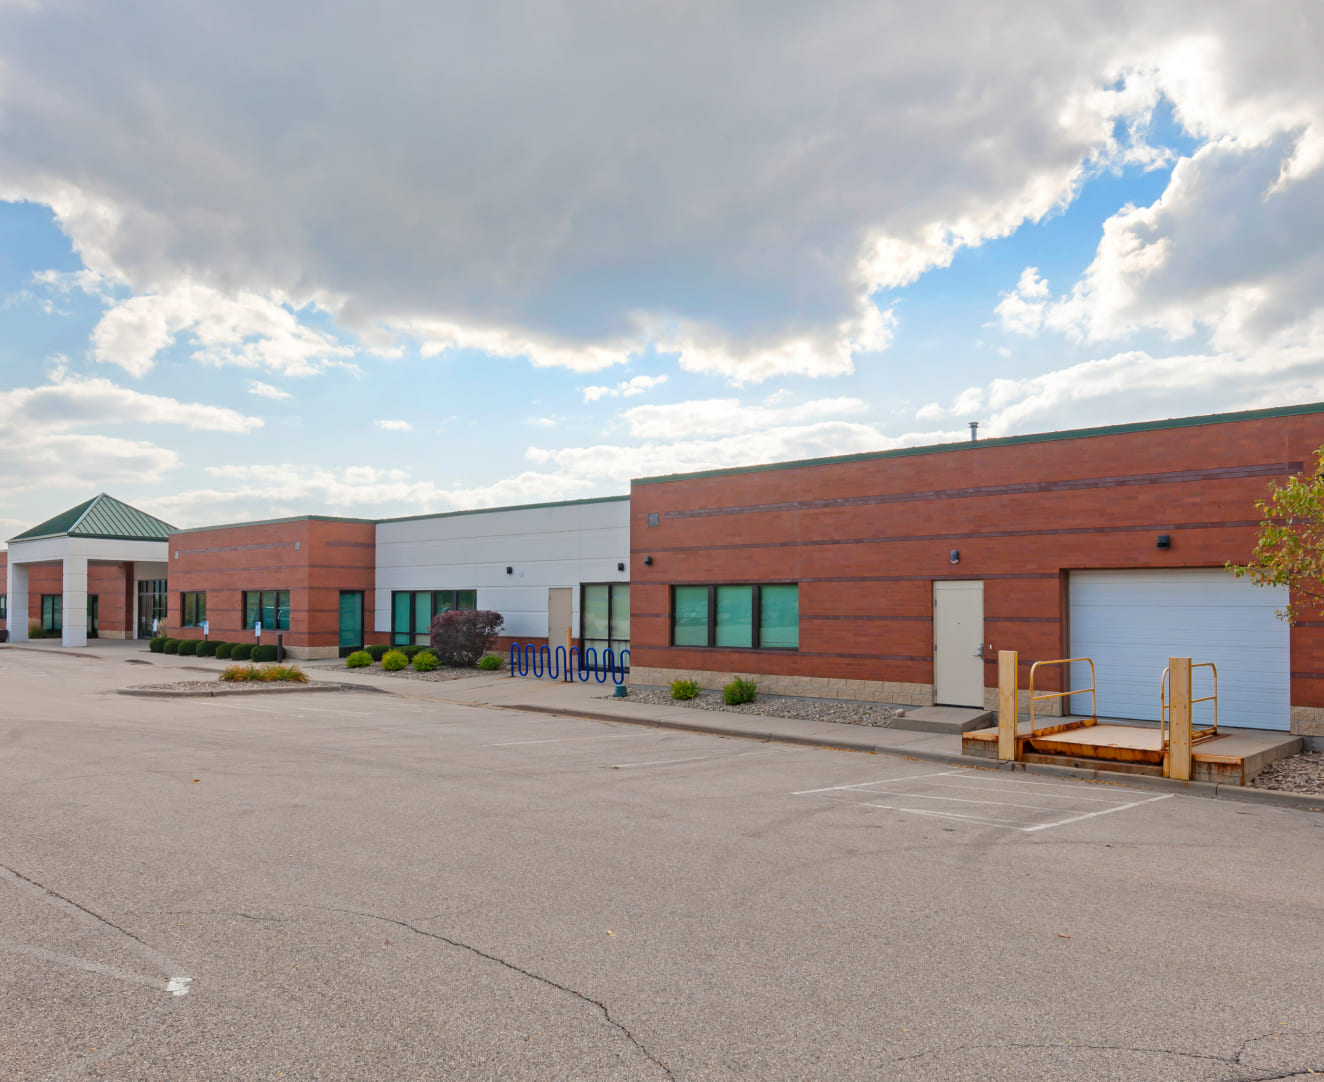 A rightside view of the parking lot and office building at 2601 Crossroads Drive in Madison, WI.